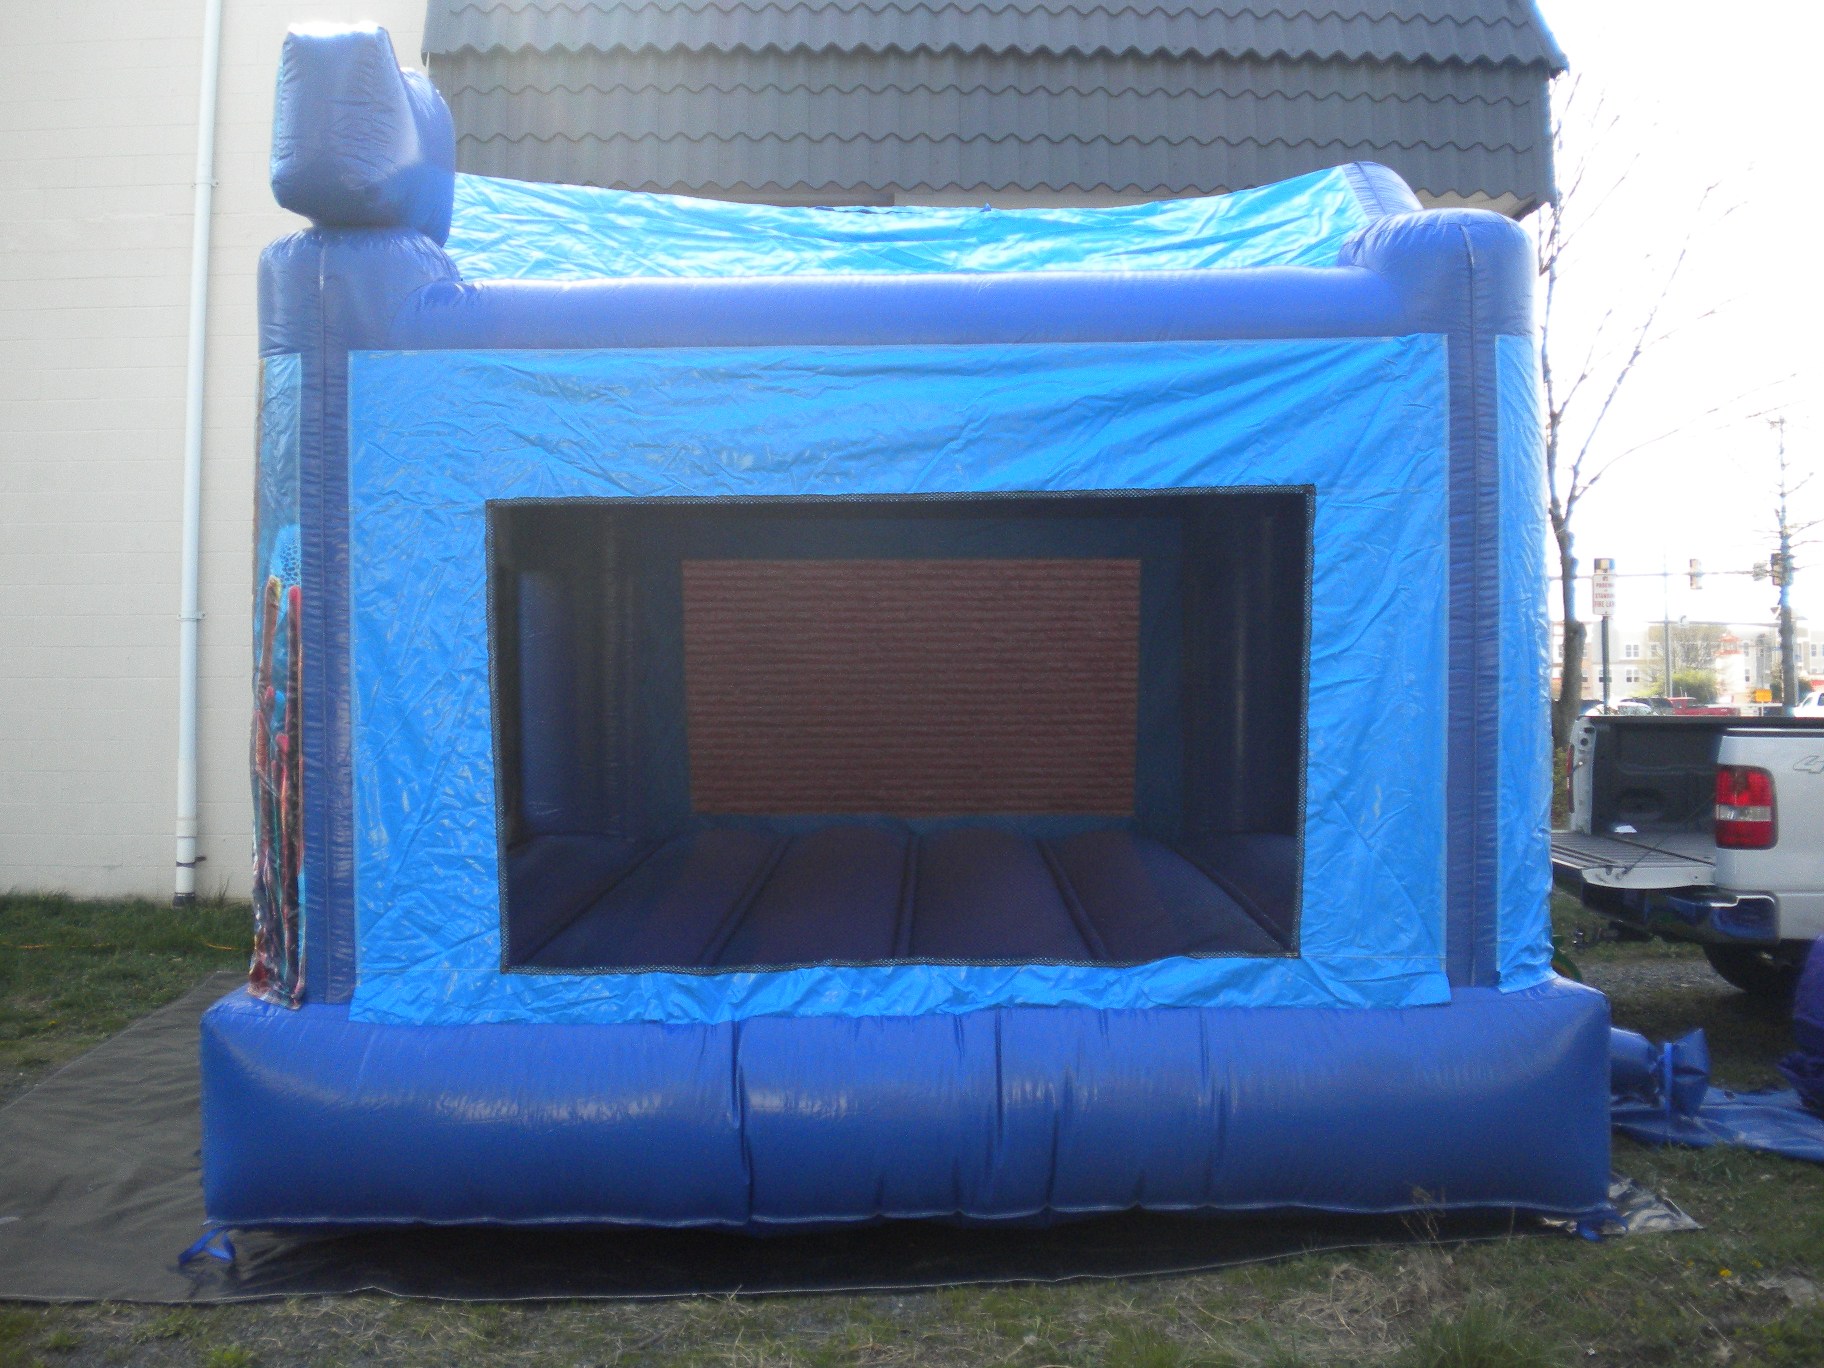 Finding Nemo Jumper Moonbouce Bounce House Right Side View